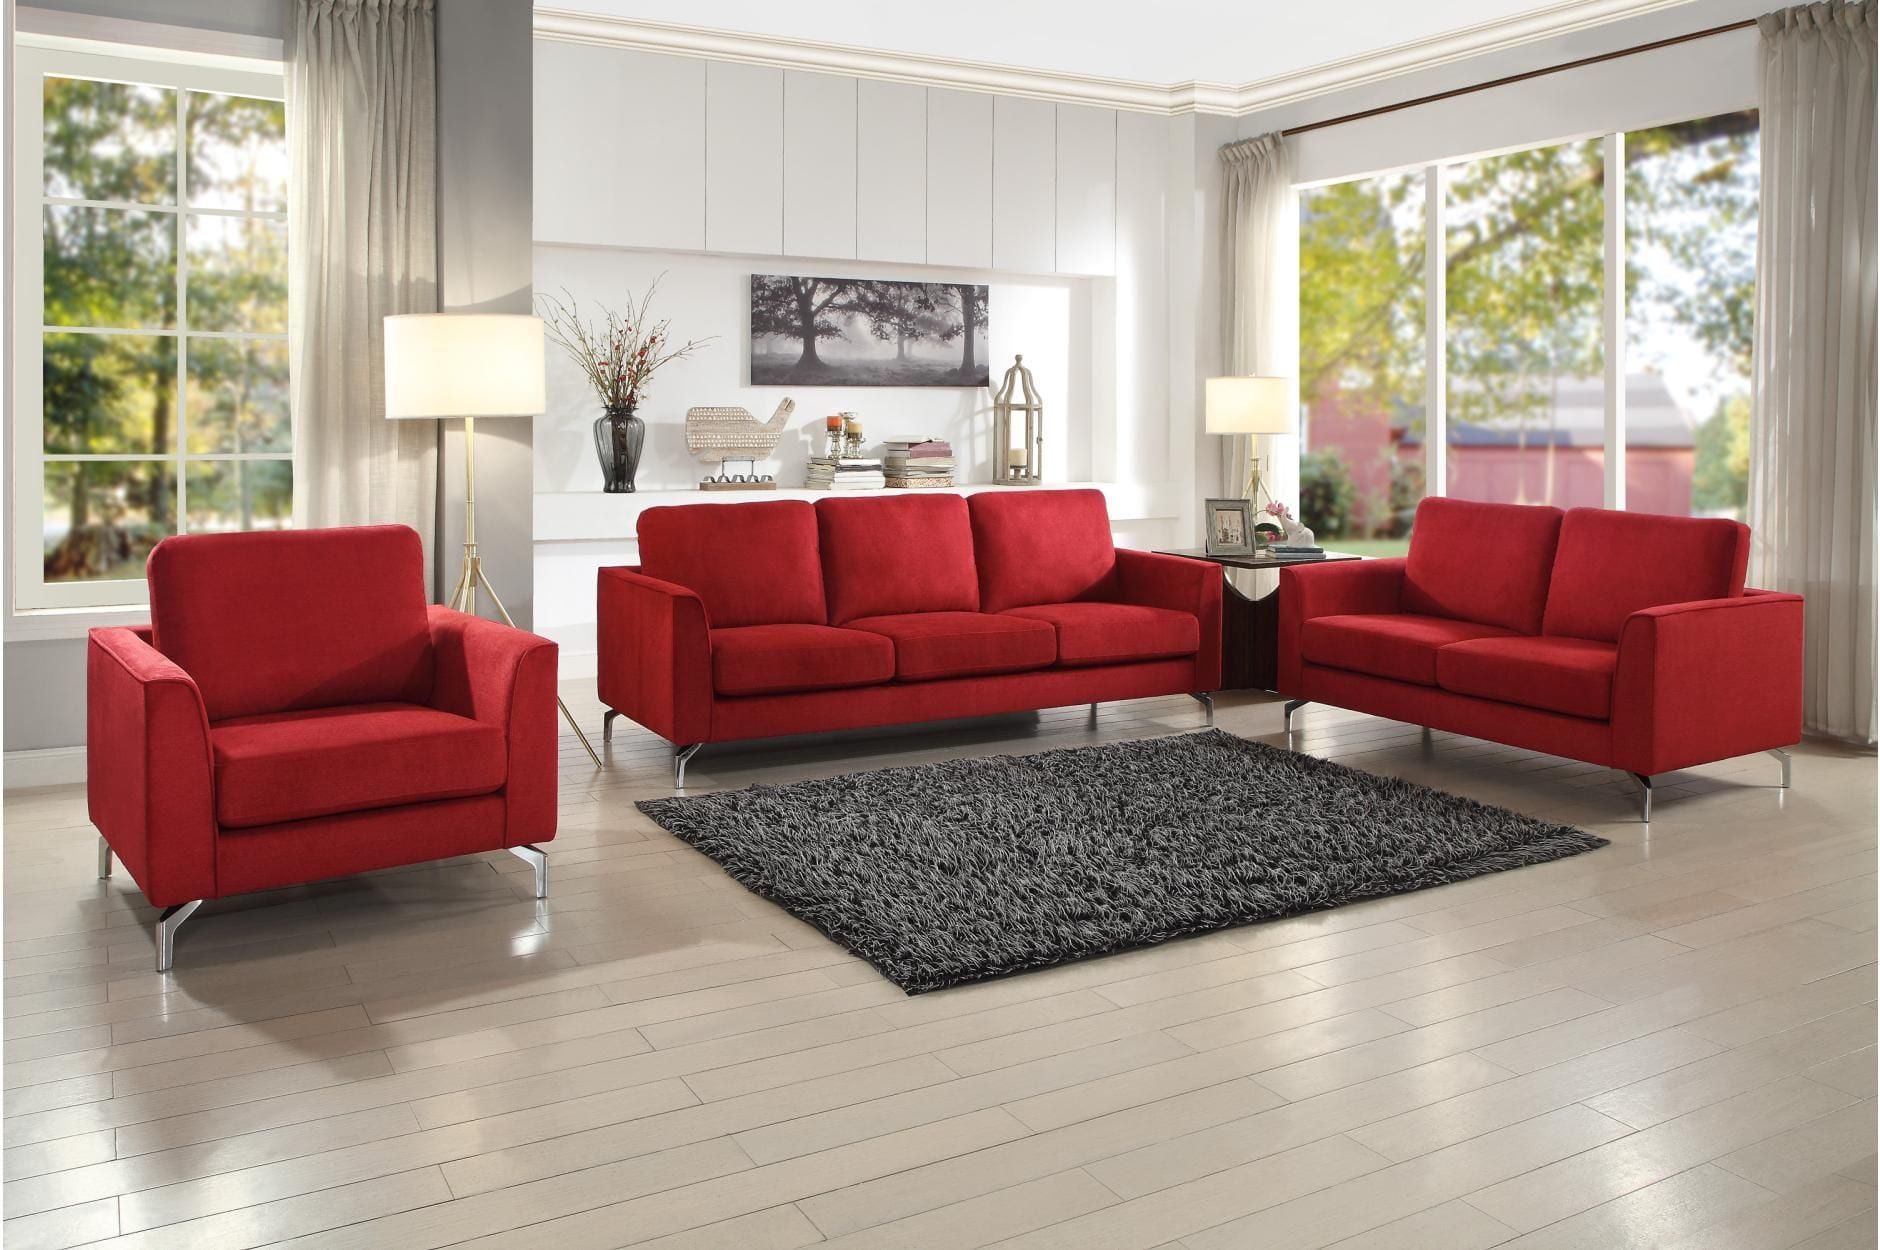 9935rd 3 Canaan Red Fabric Finish 3 Piece Sofa Set – Luchy Amor Furniture Intended For 3 Piece Console Tables (View 7 of 20)